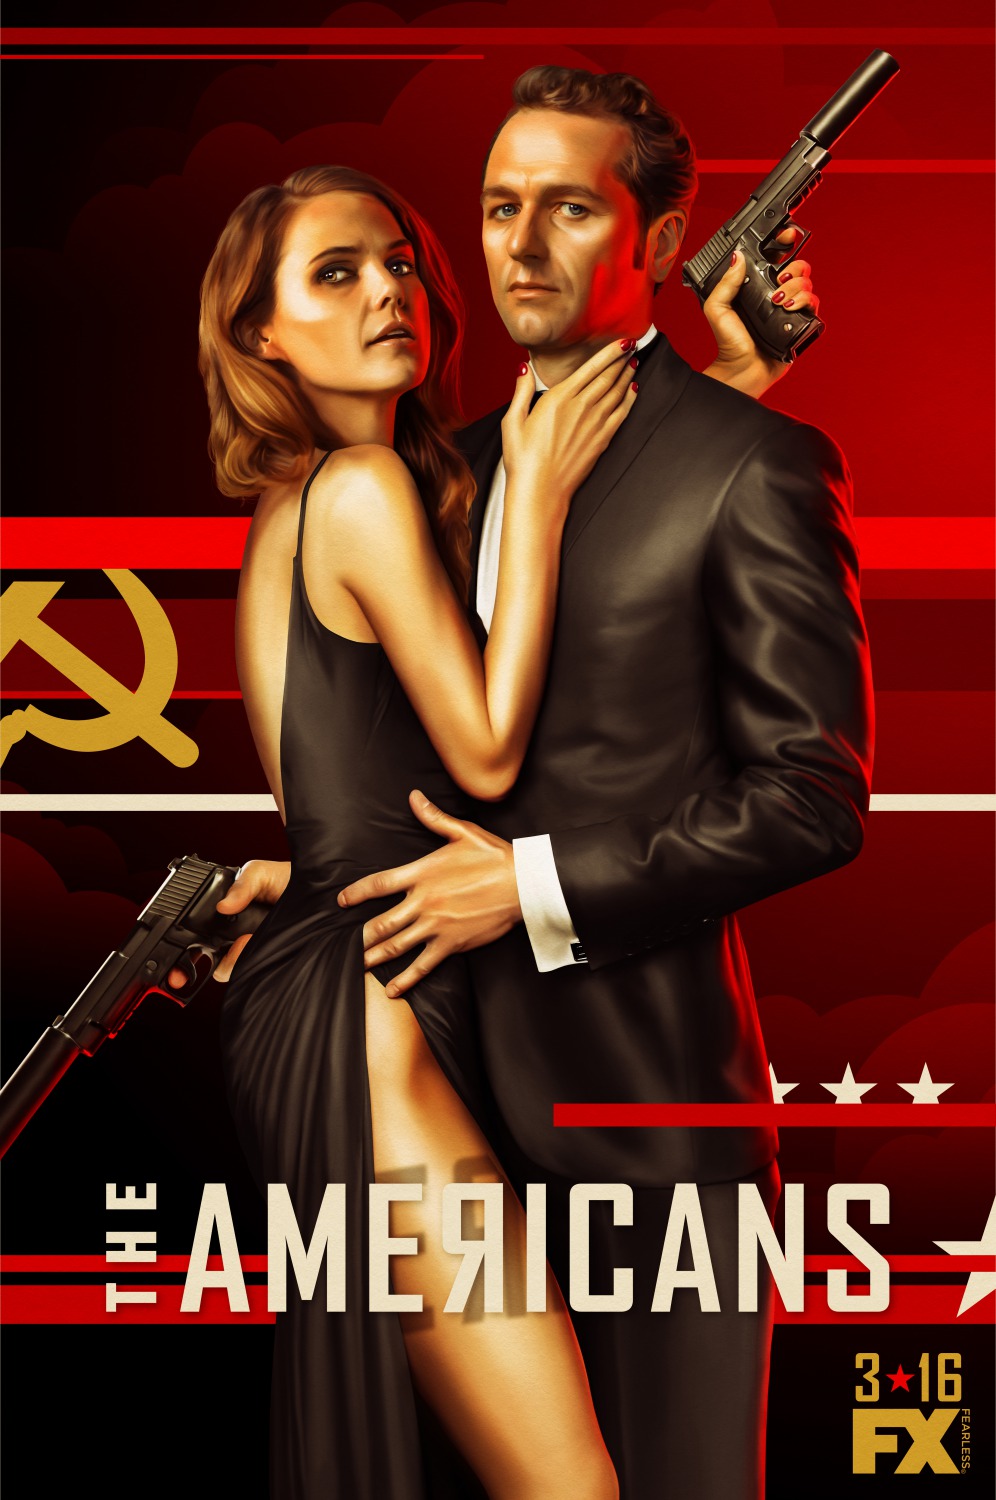 Extra Large TV Poster Image for The Americans (#13 of 16)